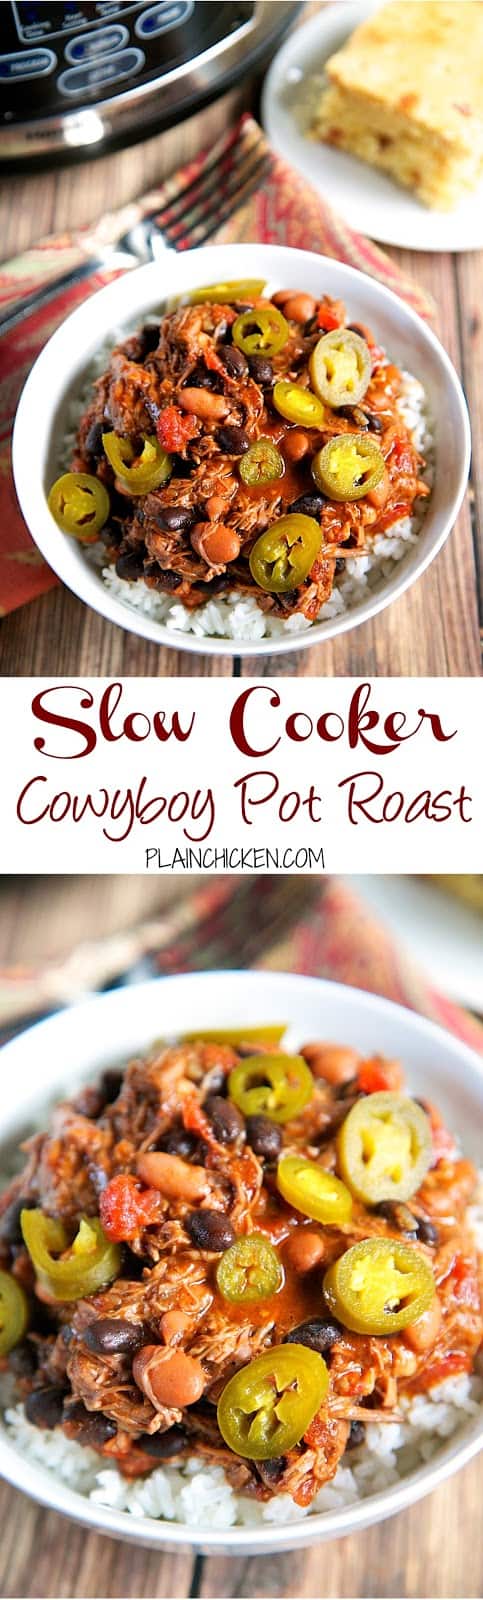 {Slow Cooker} Cowboy Pot Roast recipe - pot roast slow cooked with pinto beans, Rotel tomatoes, black beans and chili powder. SO good! Serve over rice and top with pickled jalapeños. Also makes a great freezer meal! 